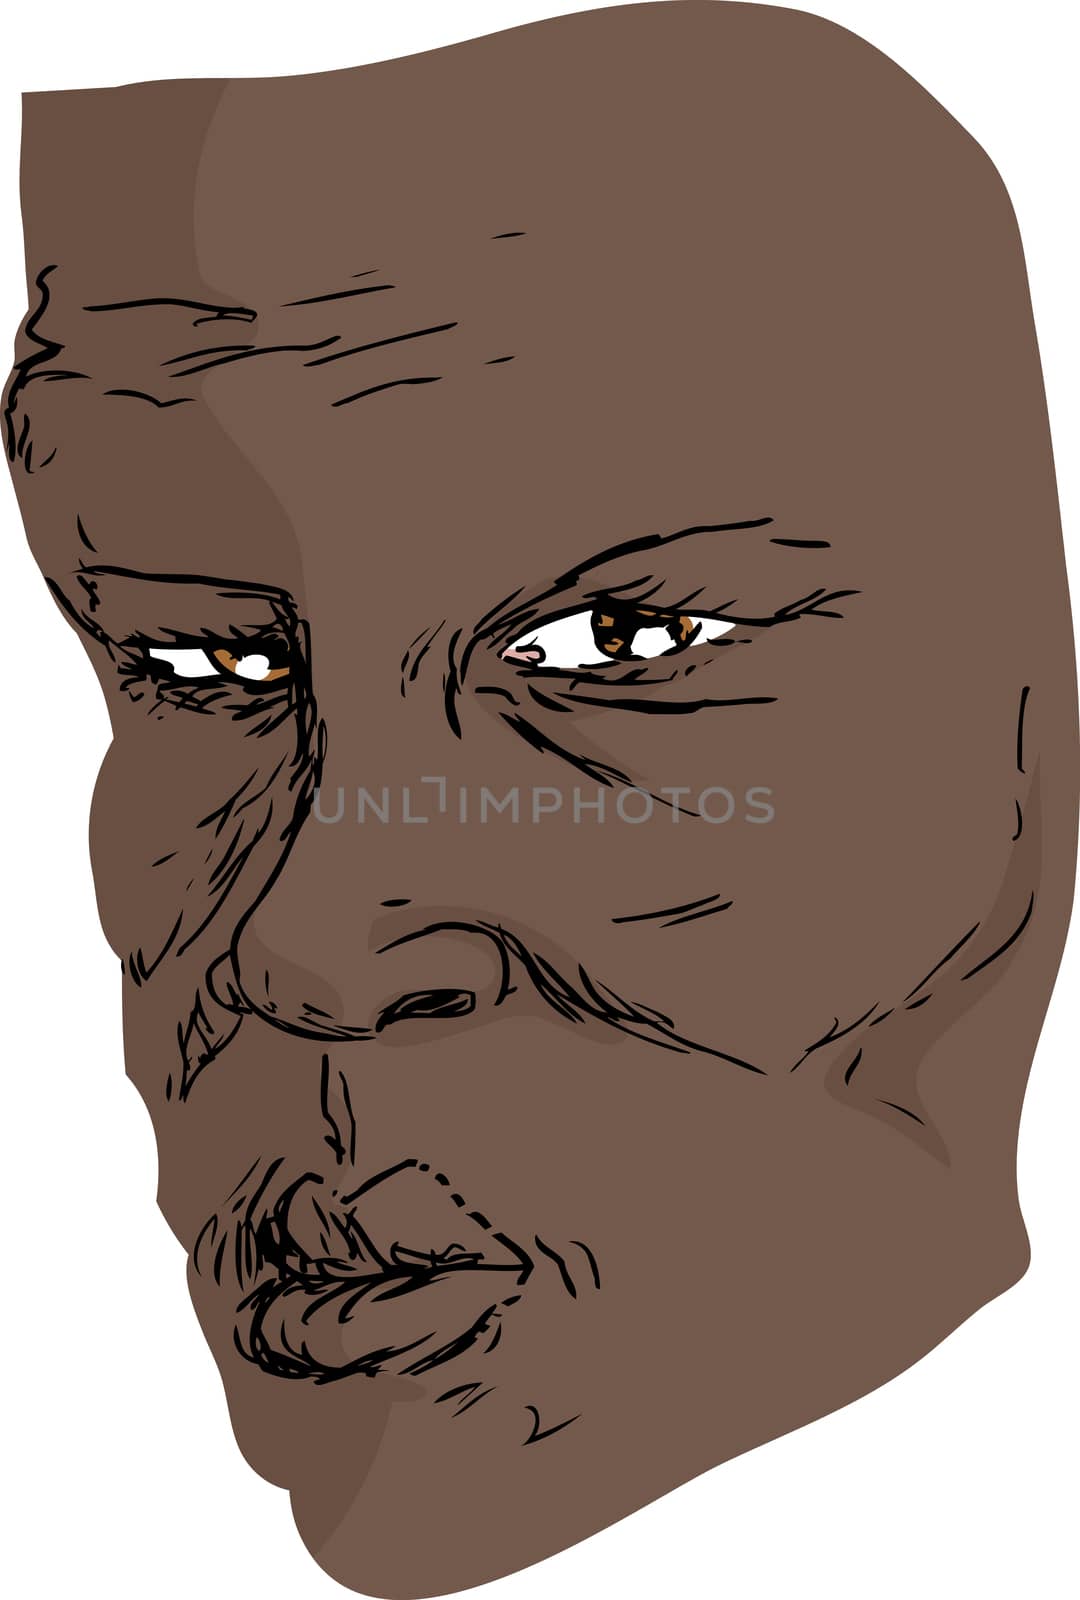 Freehand drawing of older serious Black man